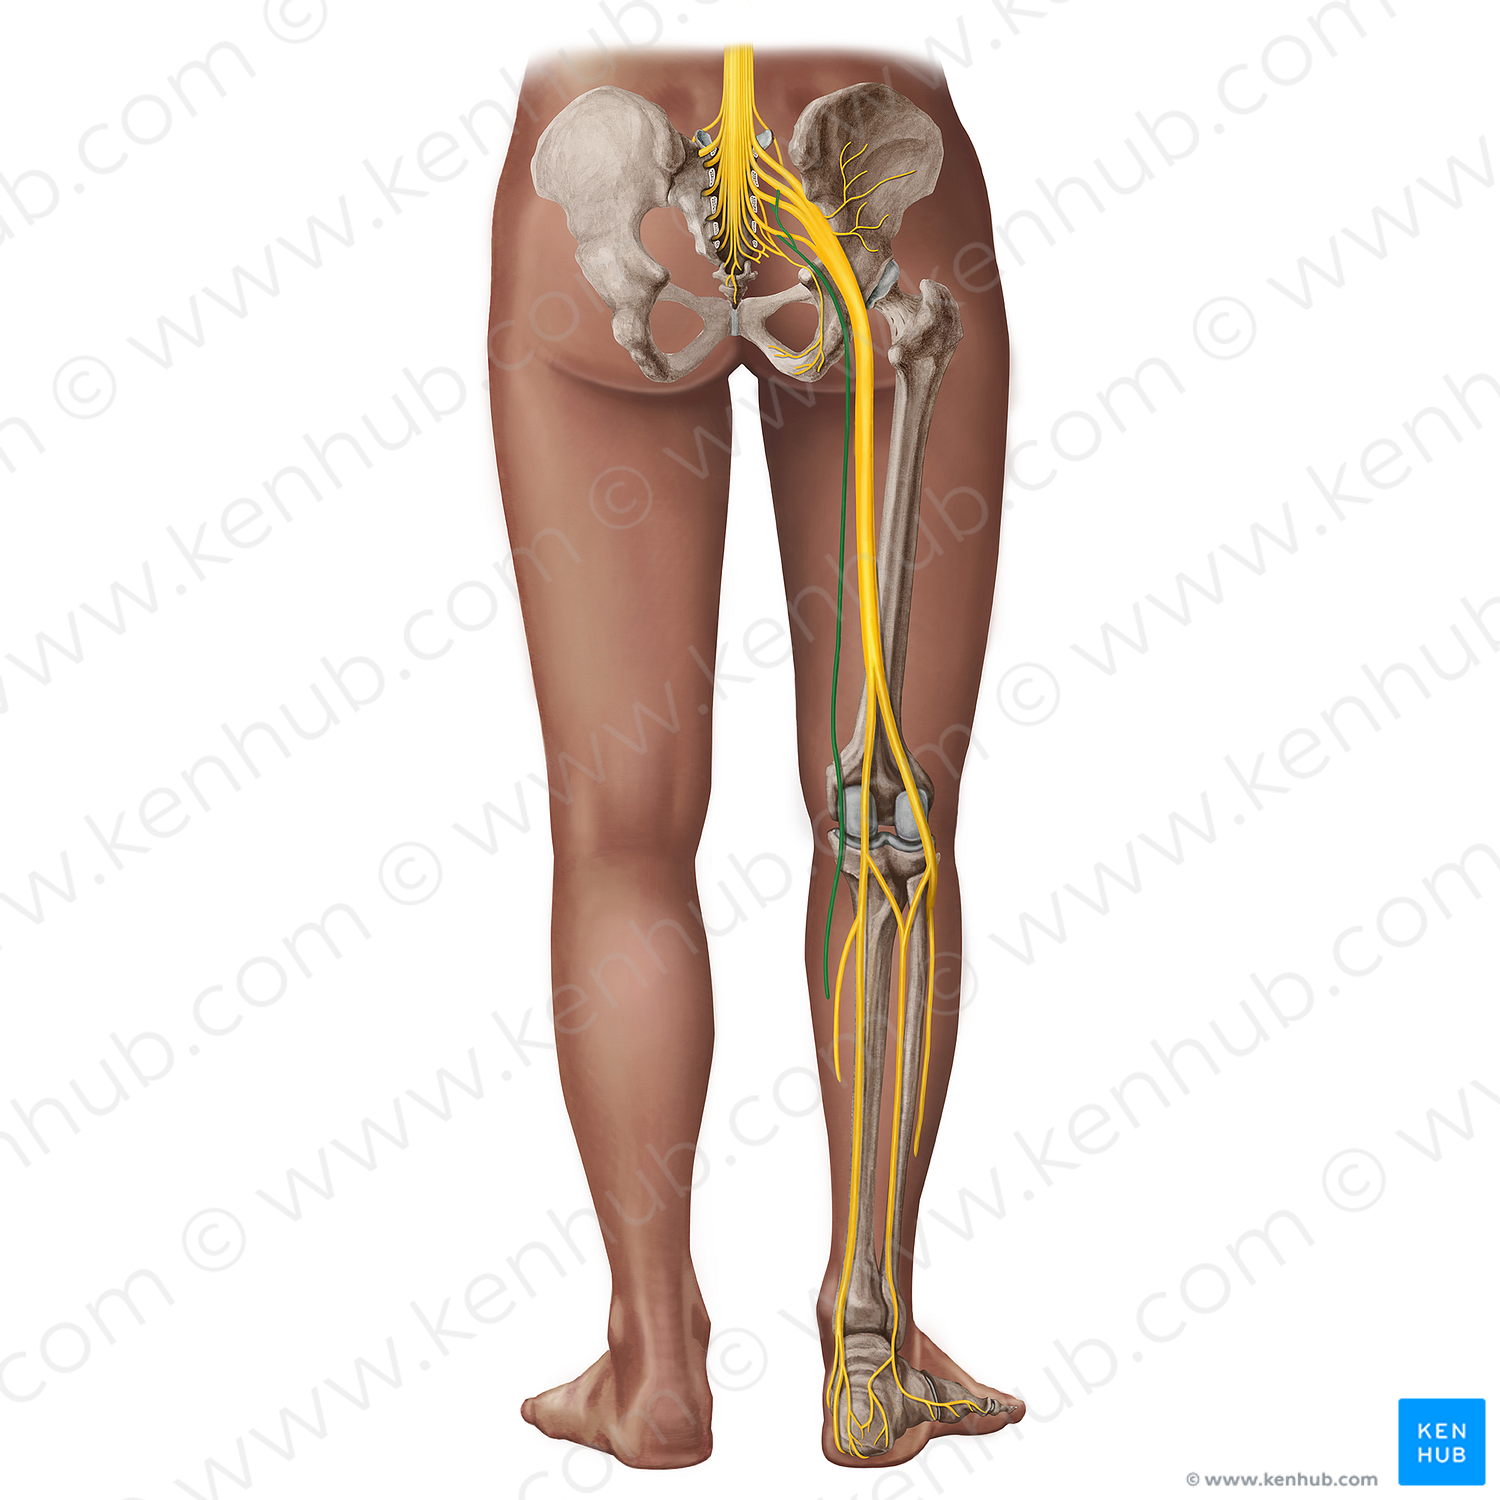 Posterior femoral cutaneous nerve (#18286)